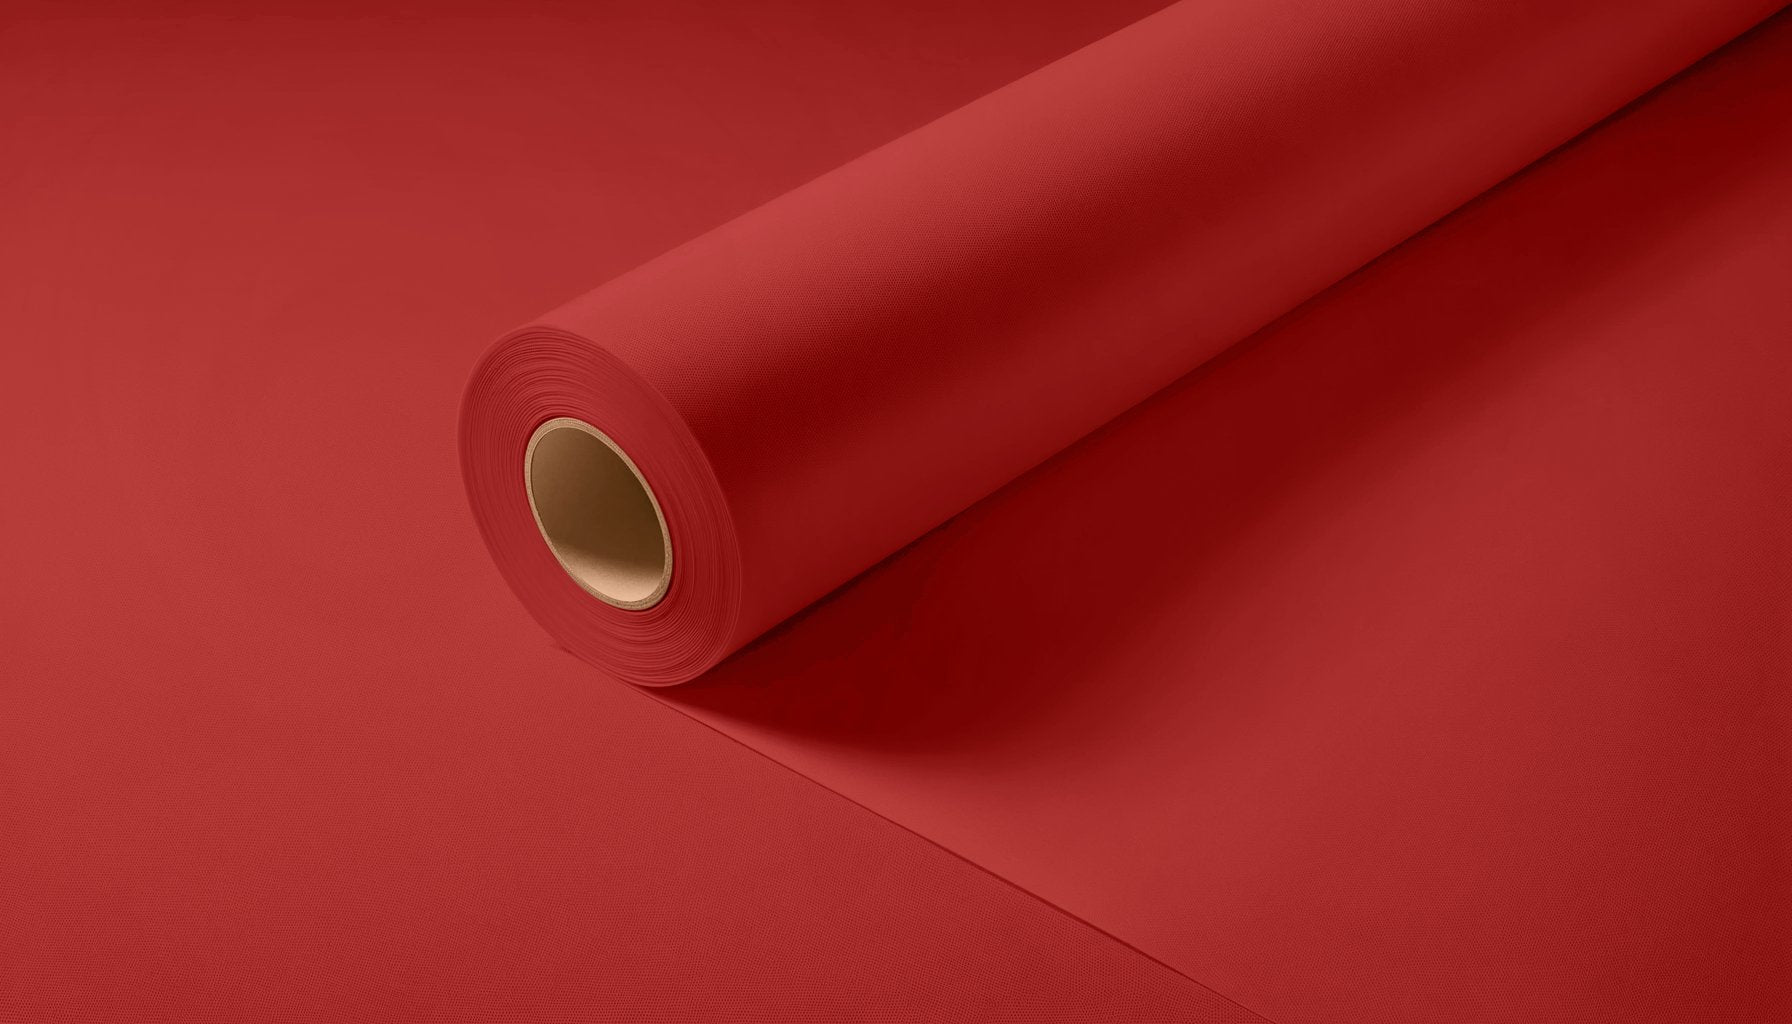 Peel & Stick Removable Re-usable Paint - Color RAL 3002 Carmine Red - offRAL™ - RALRAW LLC, USA